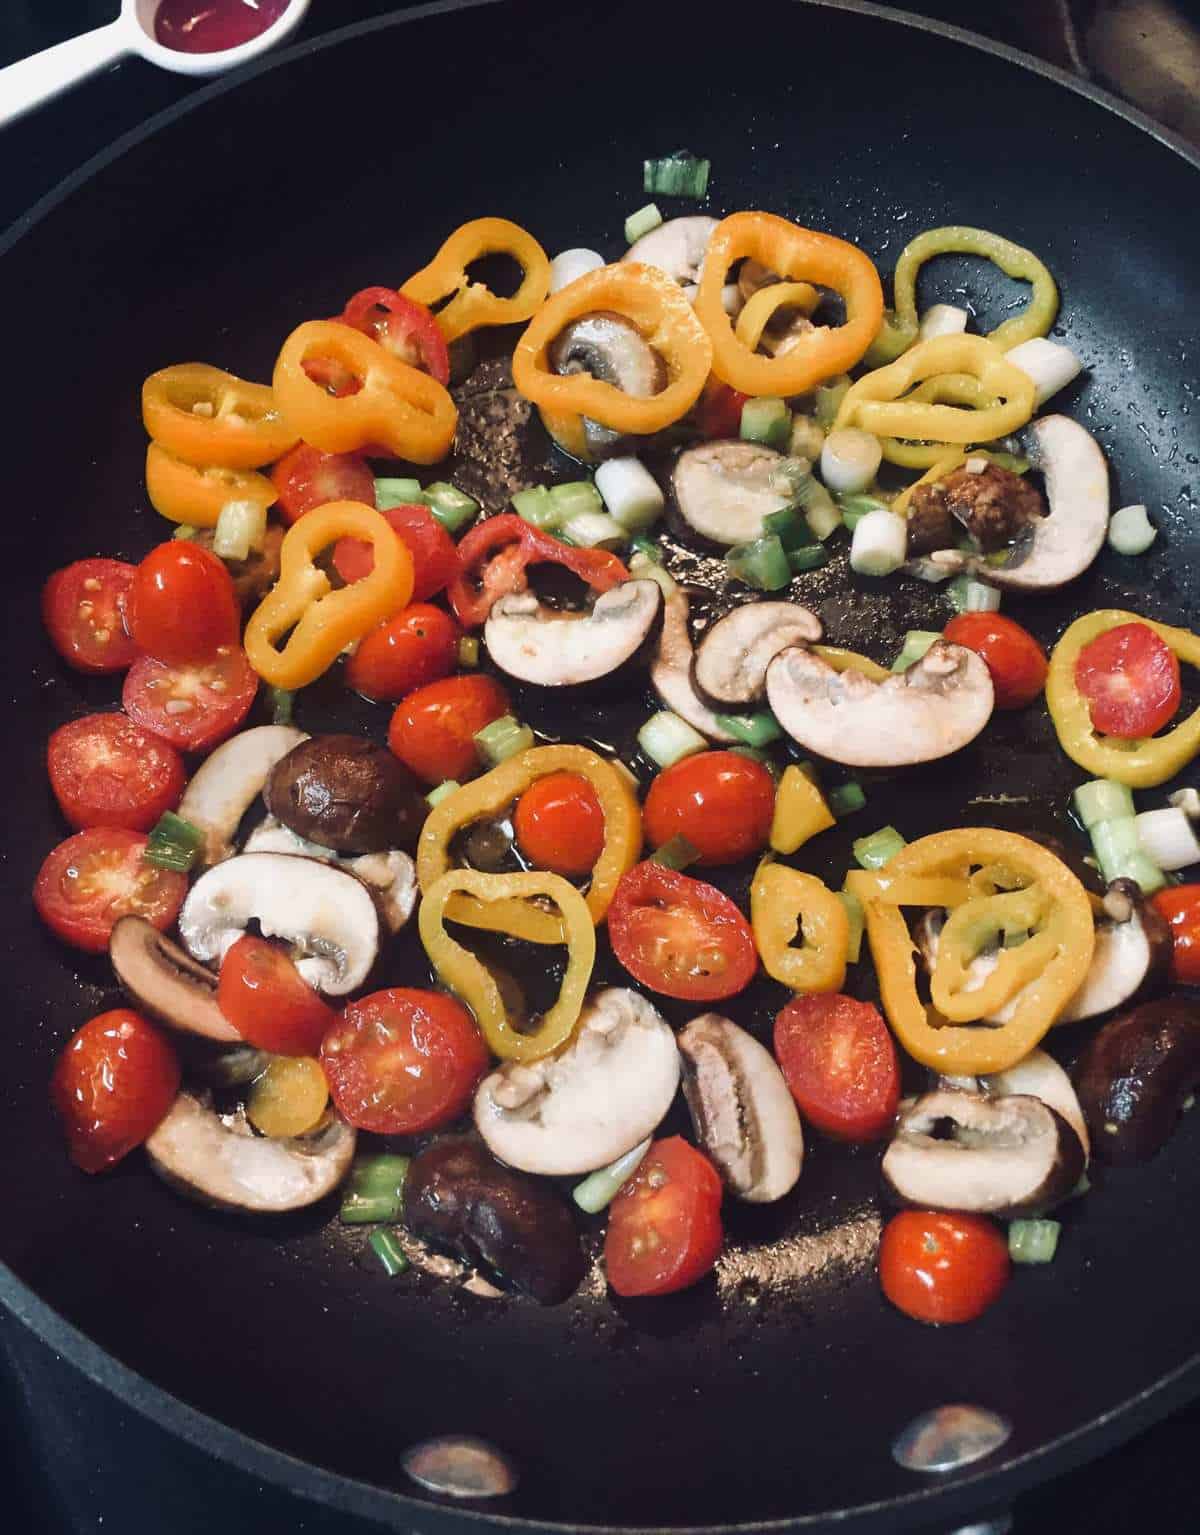 skillet with cherry tomatoes, mushrooms, yellow sliced peppers